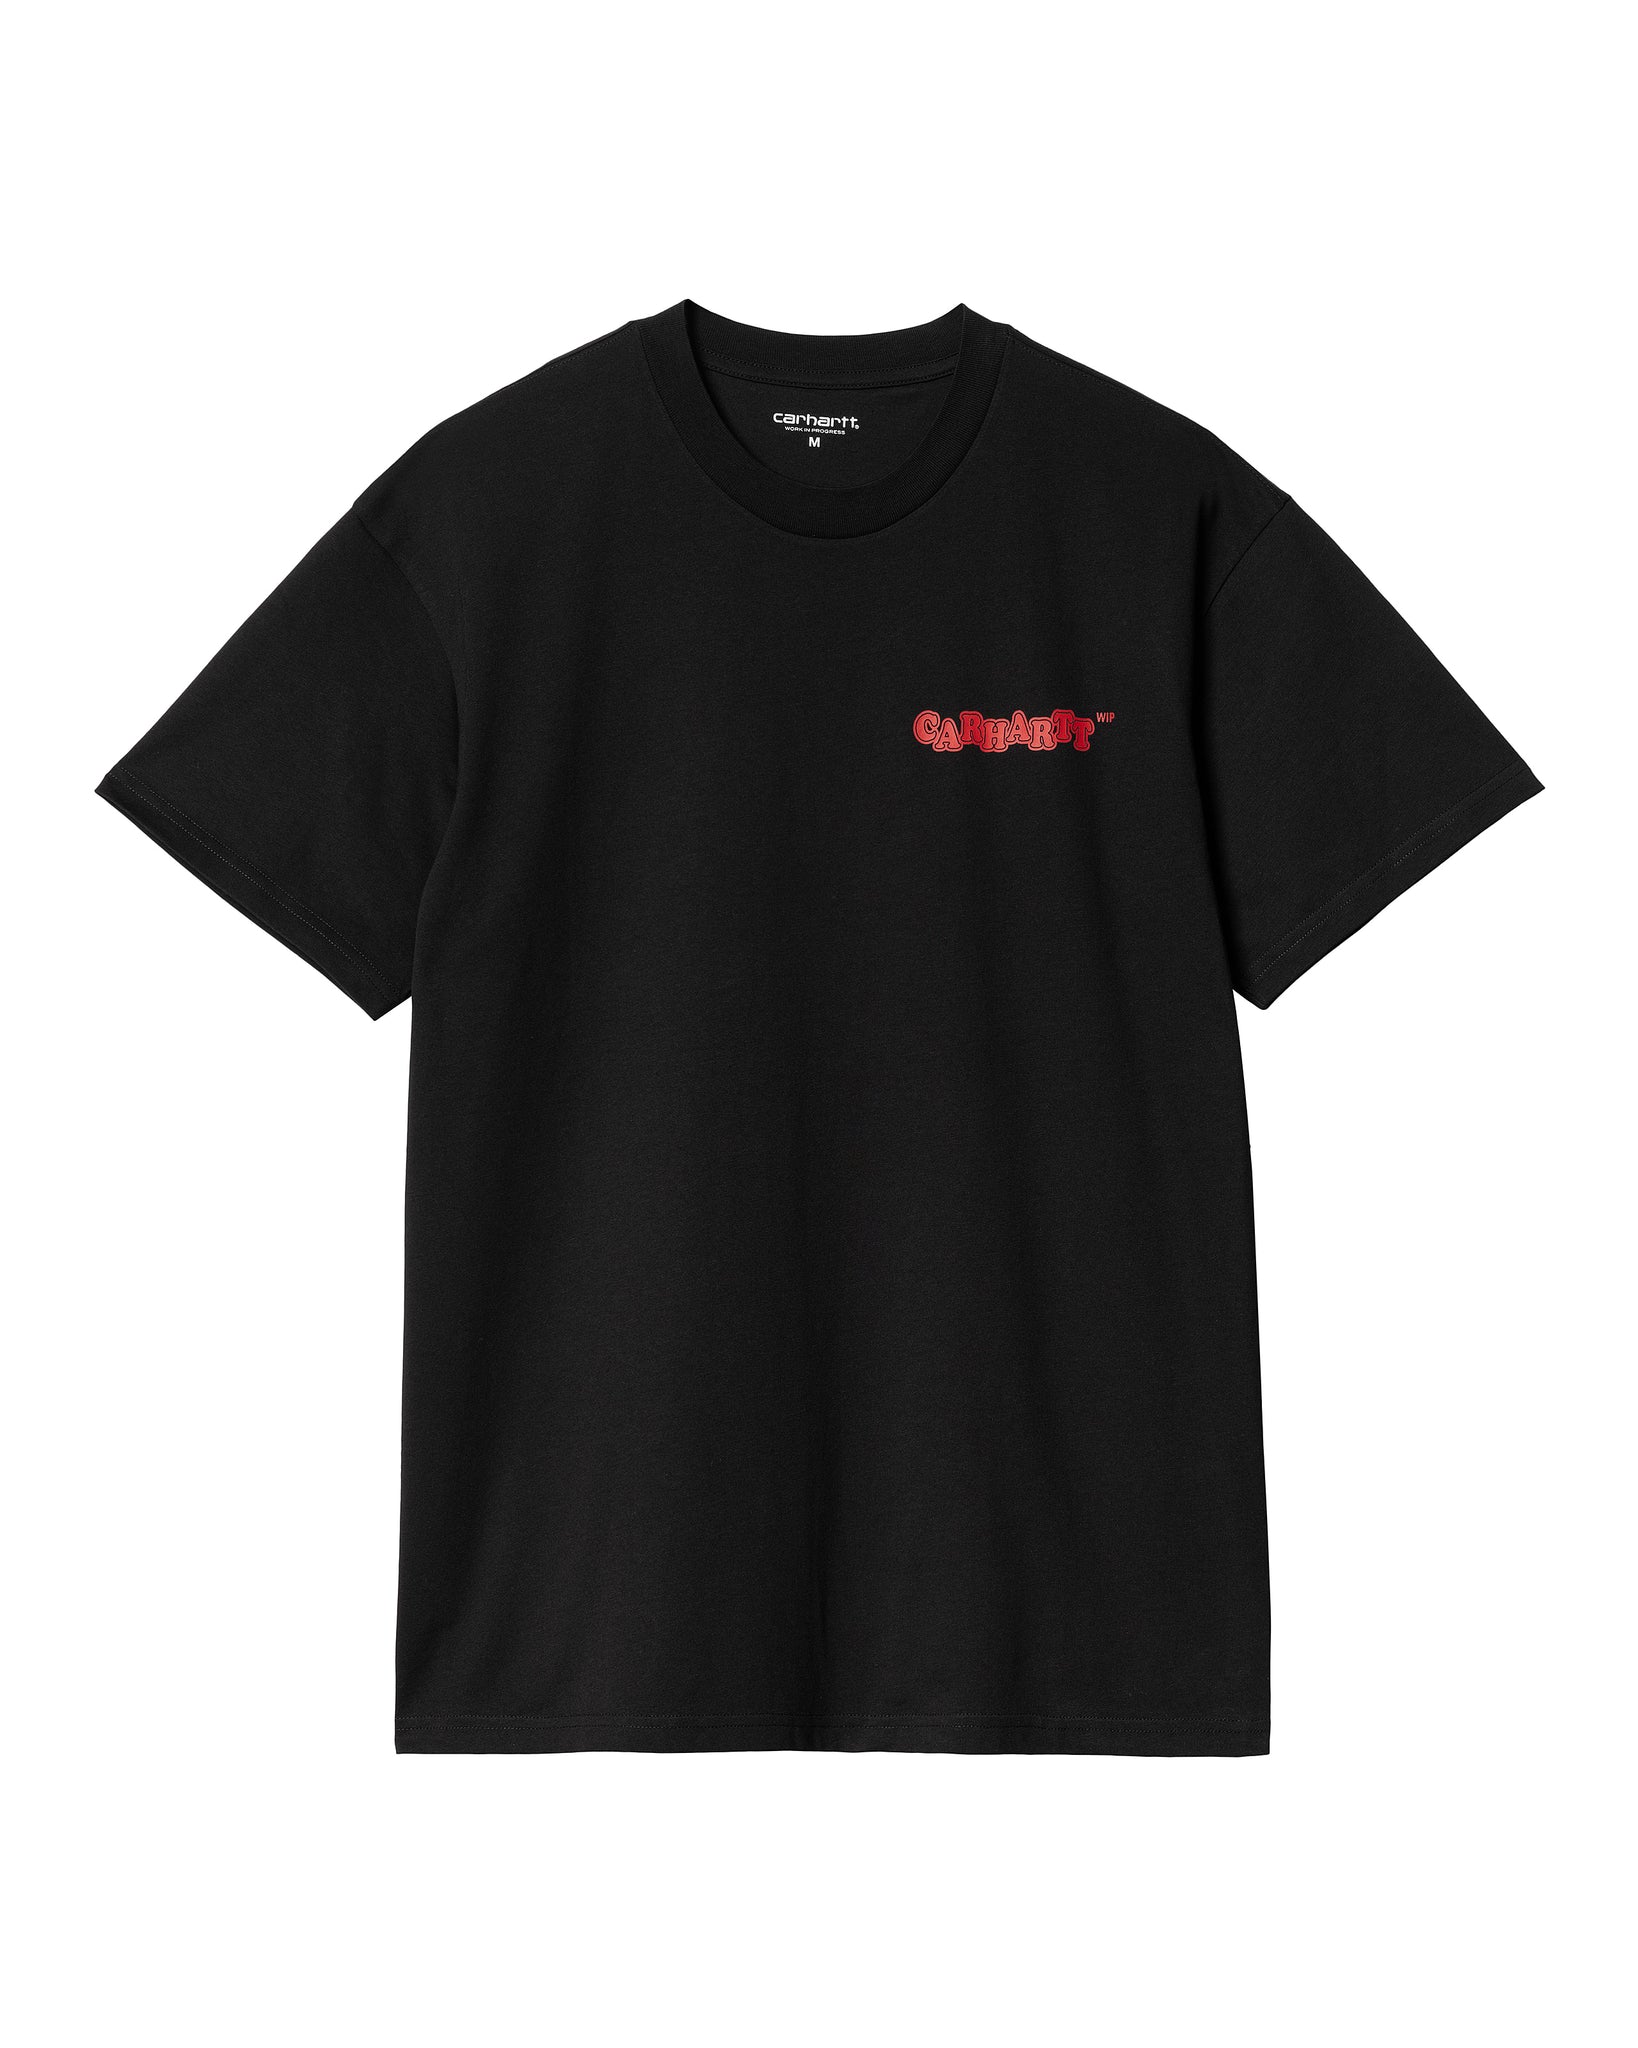 S/S Fast Food t-shirt - Black/Red